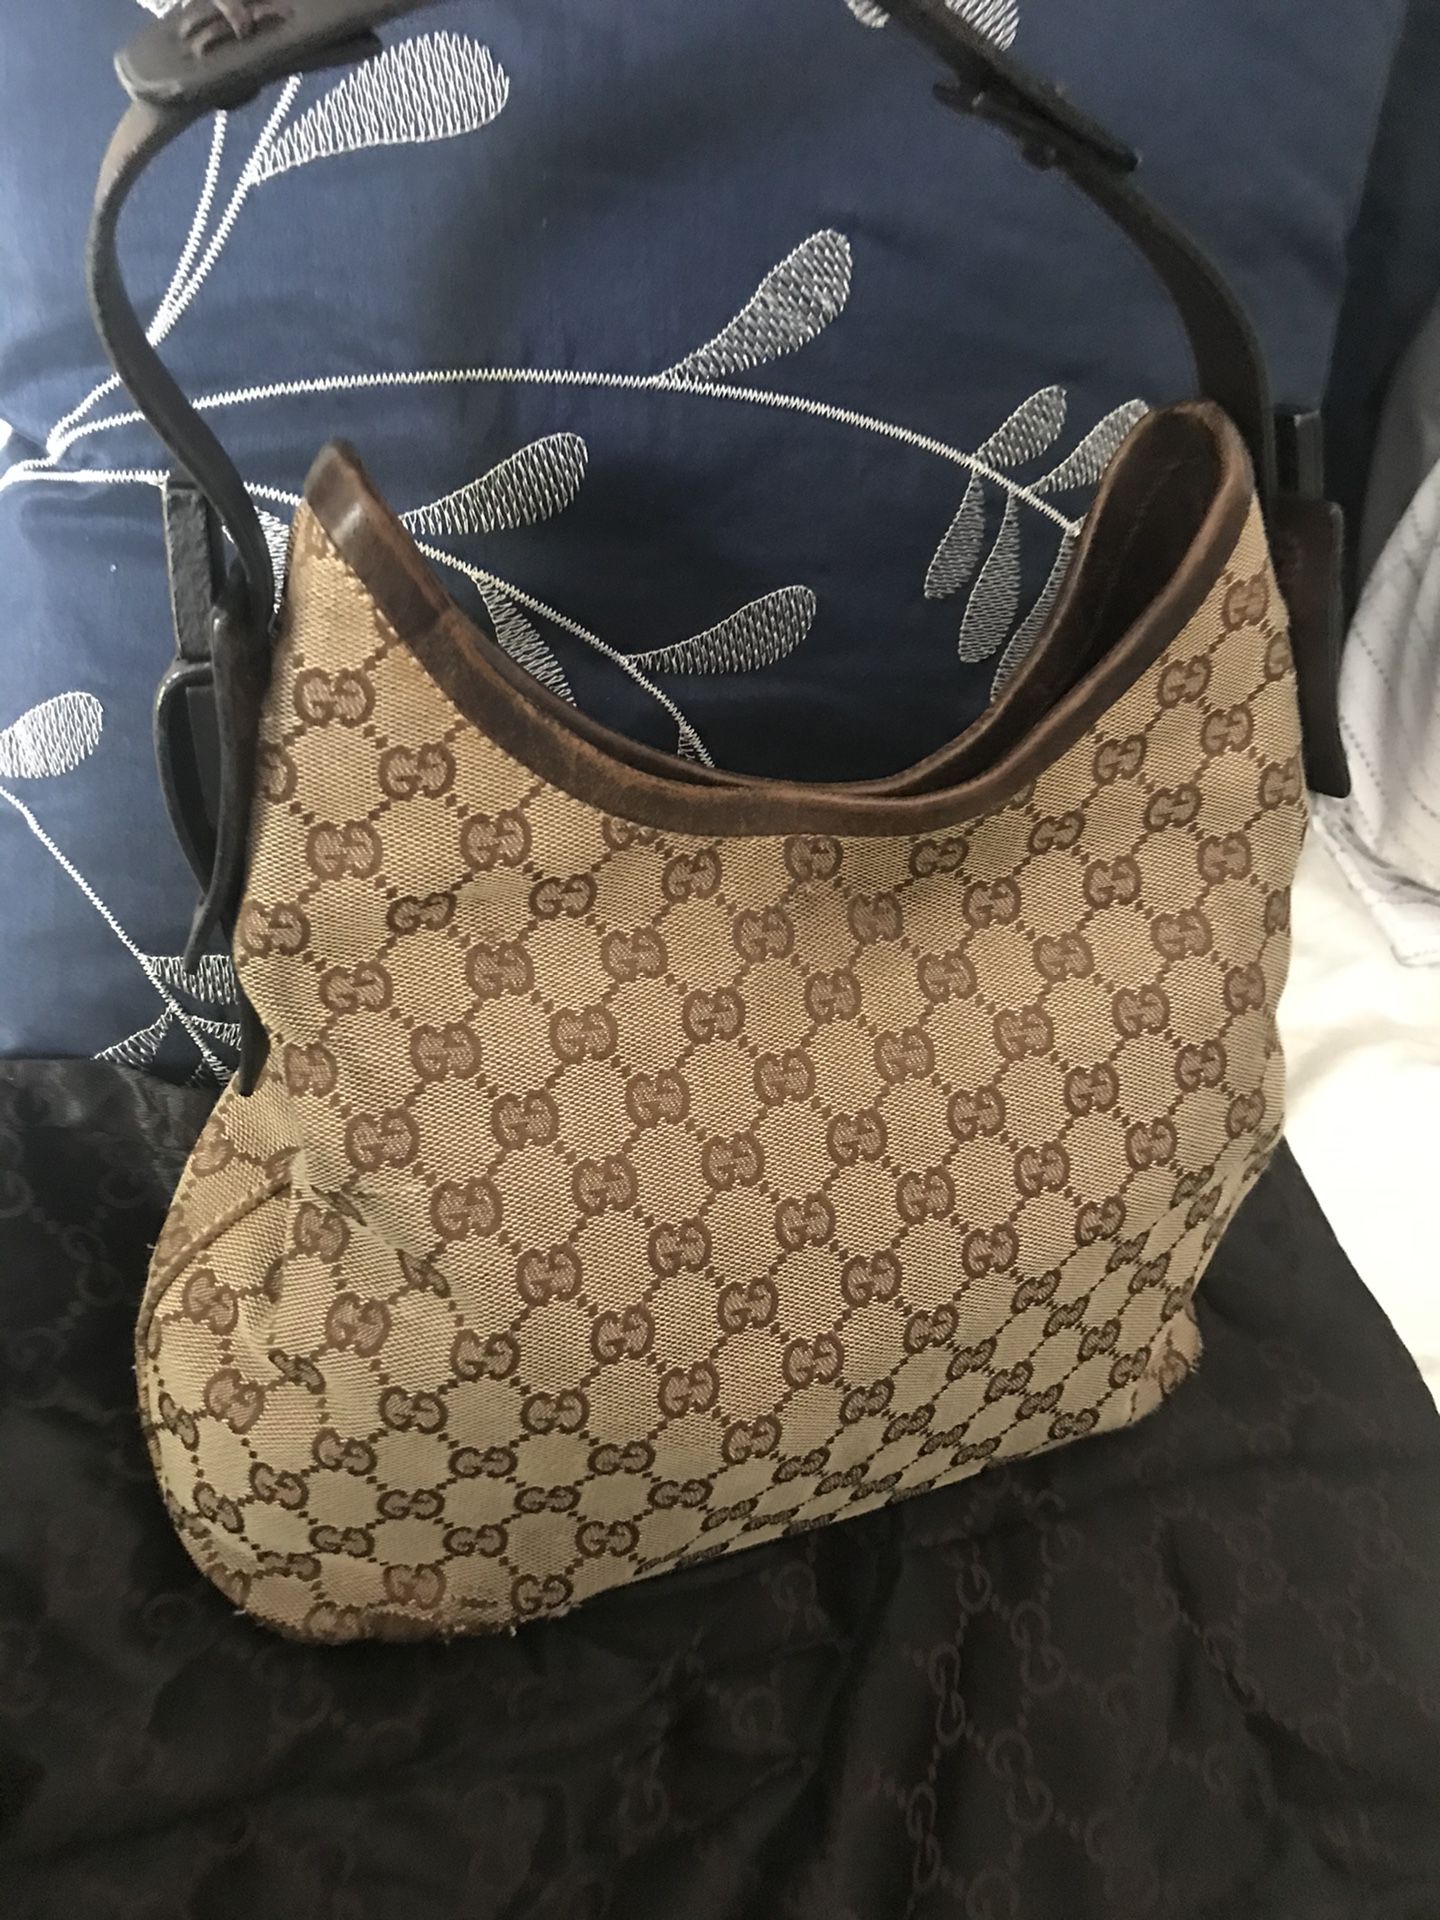 Authentic Gucci hobo style purse only 399$ obo